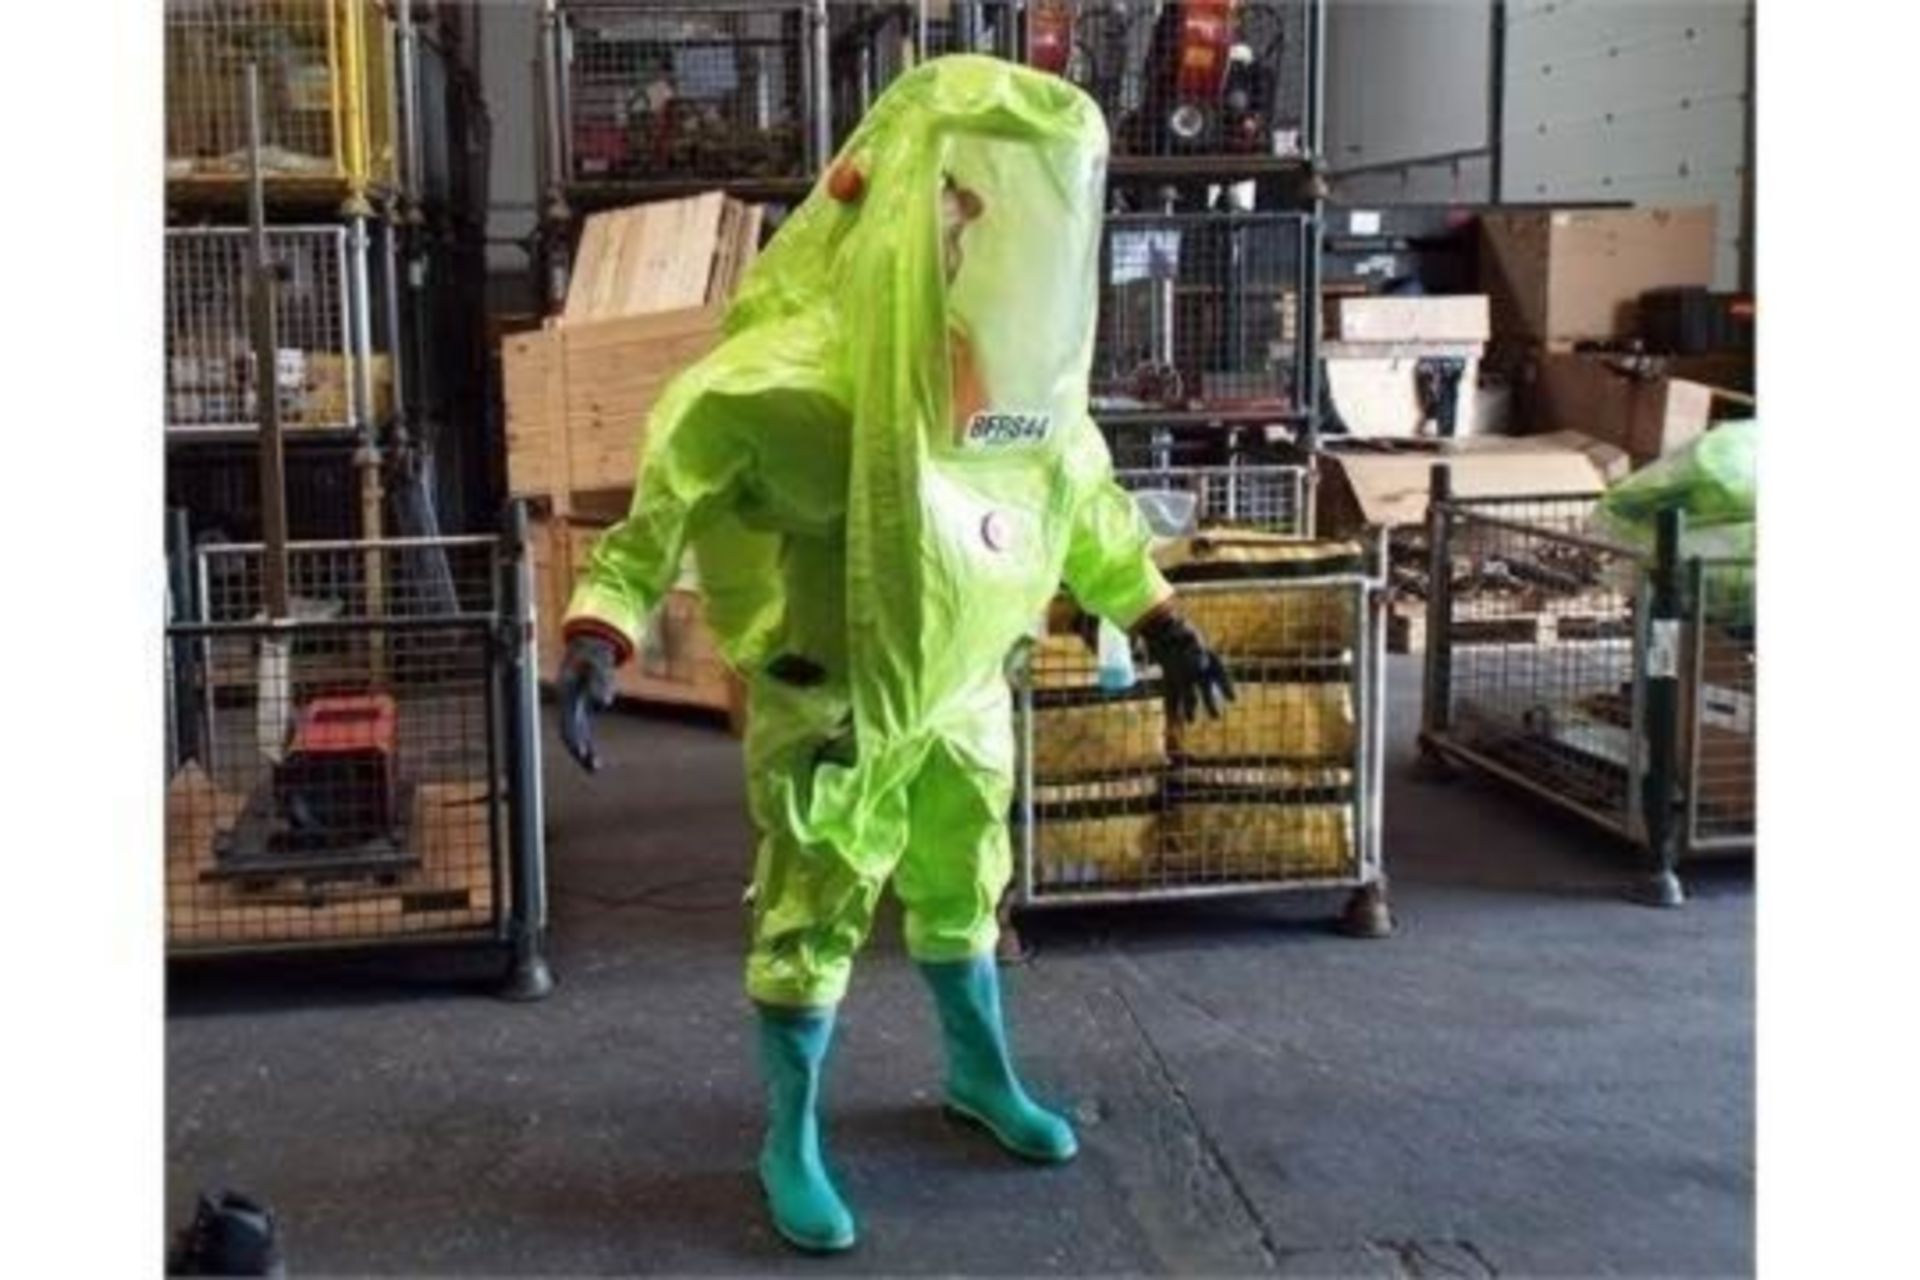 10 x Respirex Tychem TK Gas-Tight Hazmat Suit Type 1A with Attached Boots and Gloves. - Bild 3 aus 10